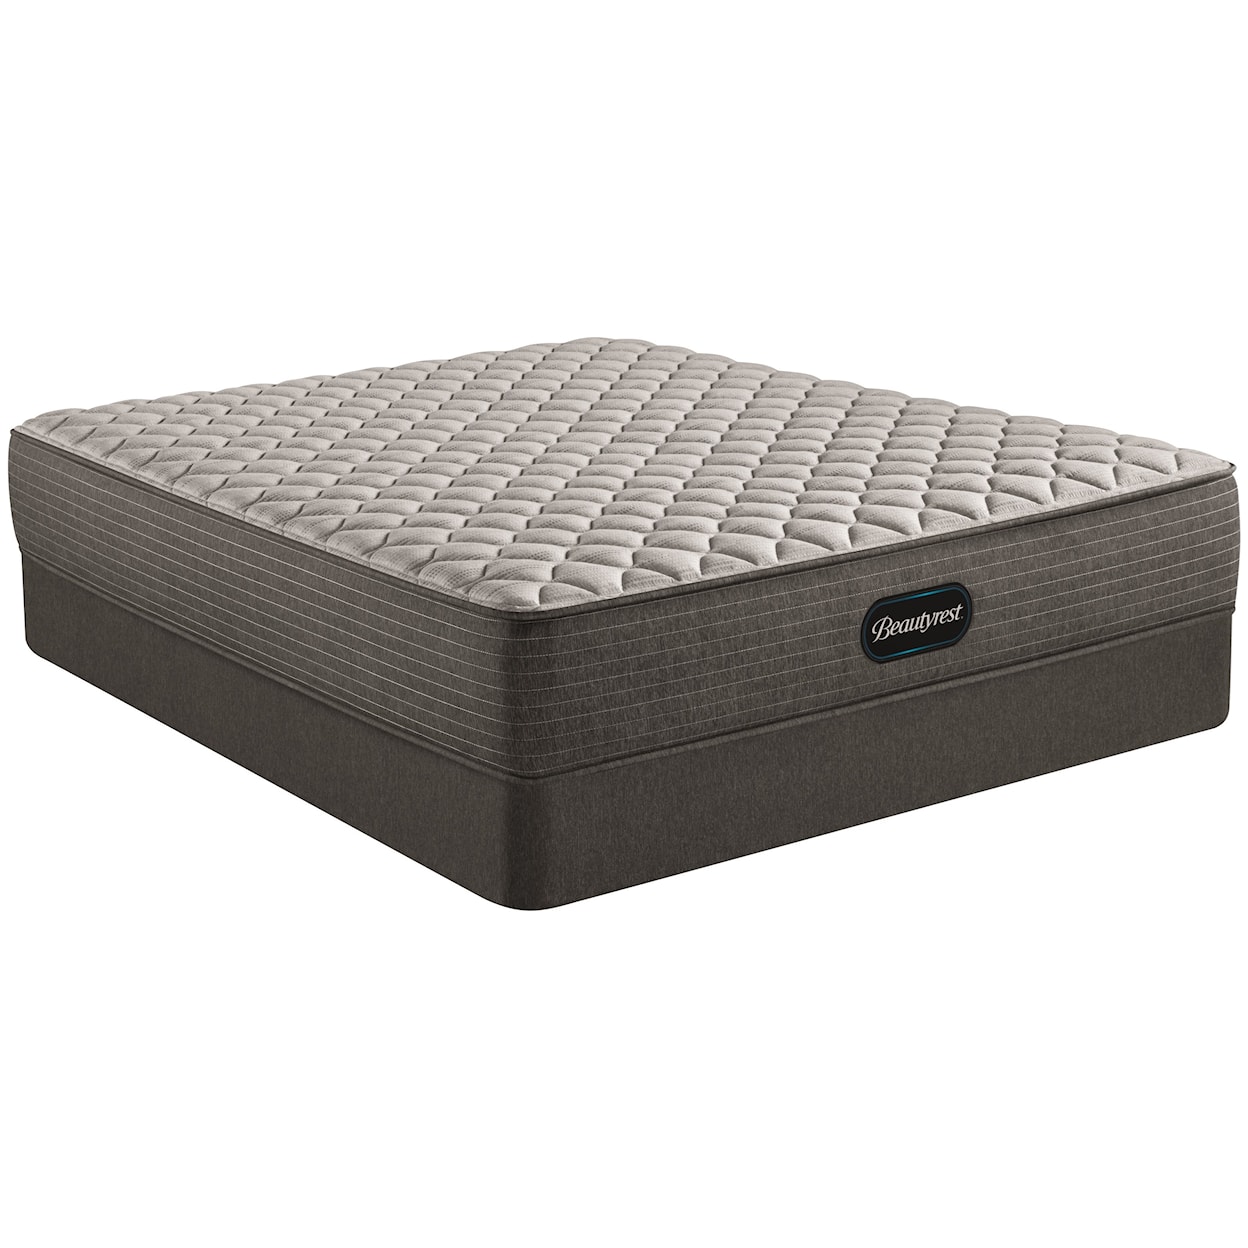 Beautyrest Select Firm Full Firm Mattress and 9" Foundation